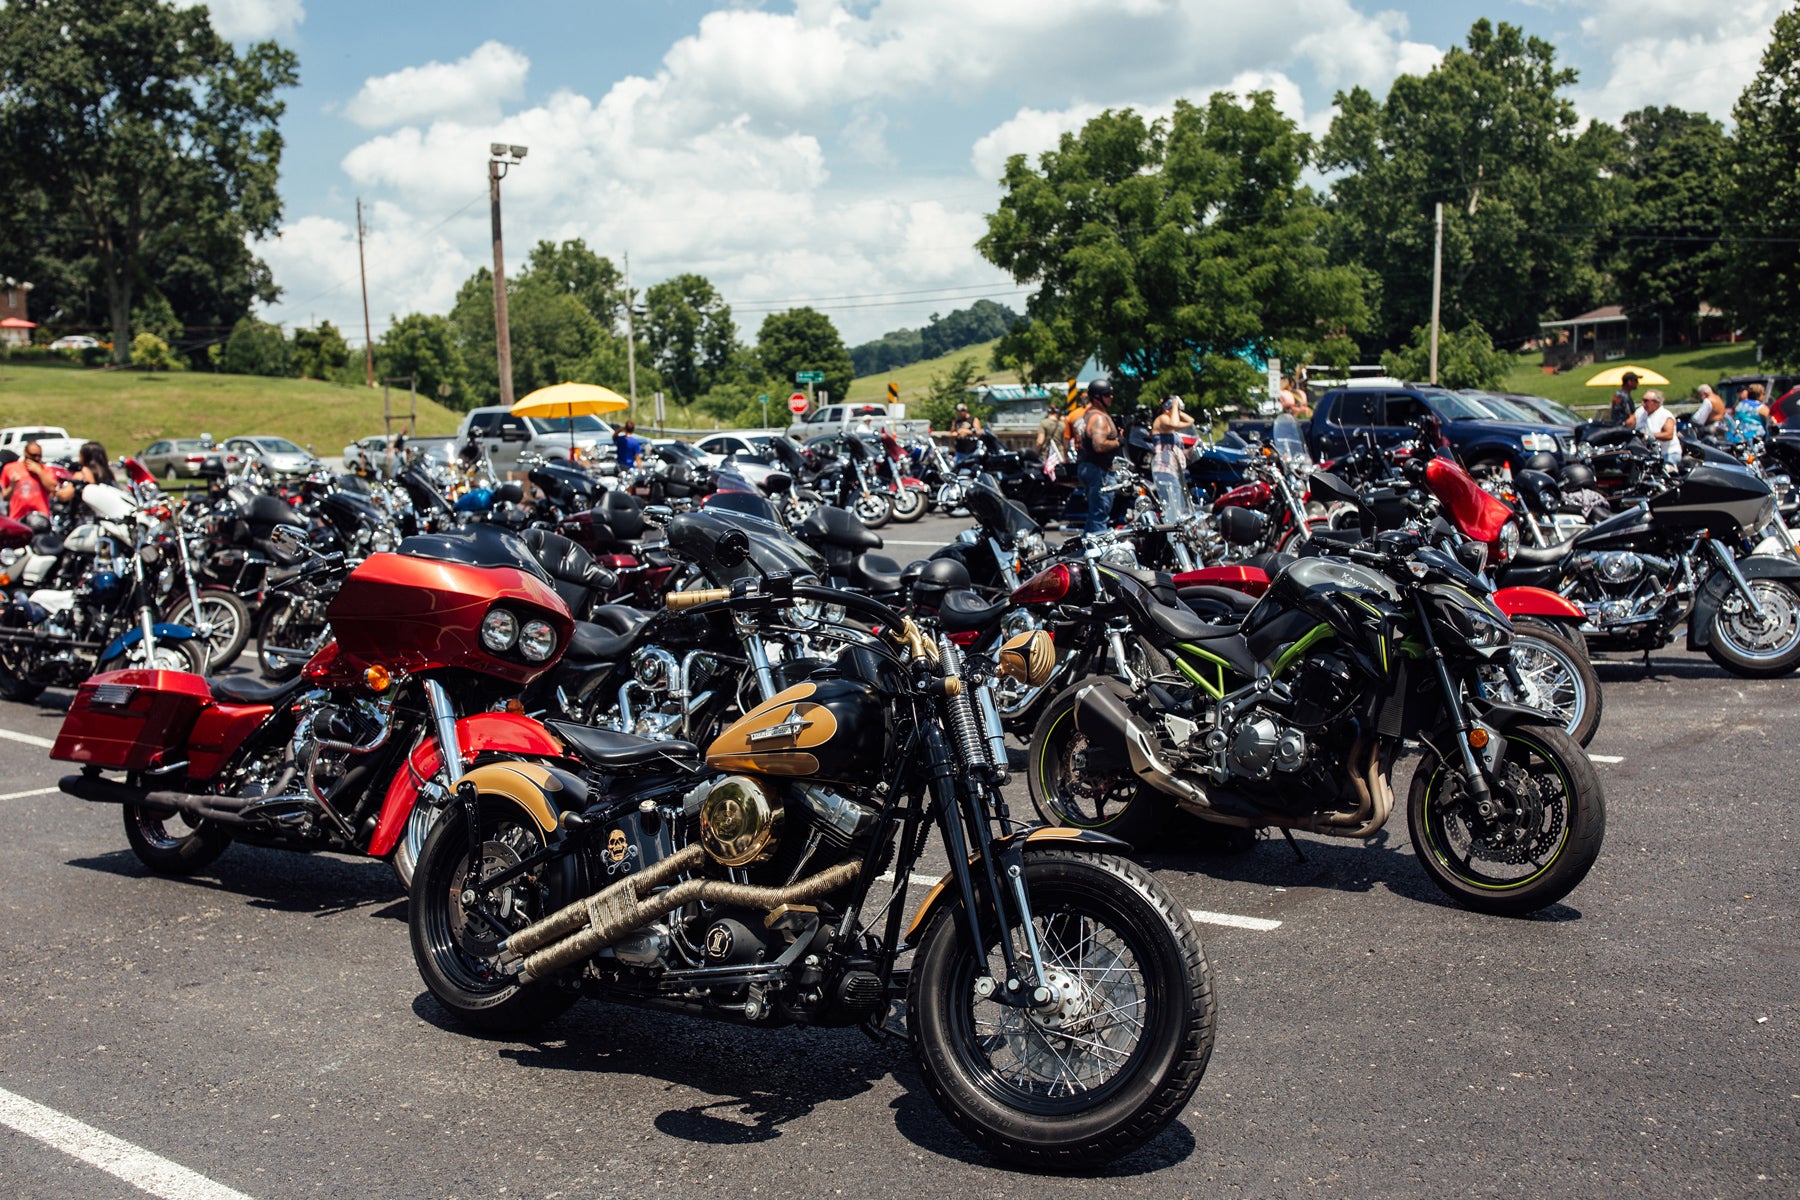 Pittsburgh Moto Summer Outpost RideOut Motorcycle Event